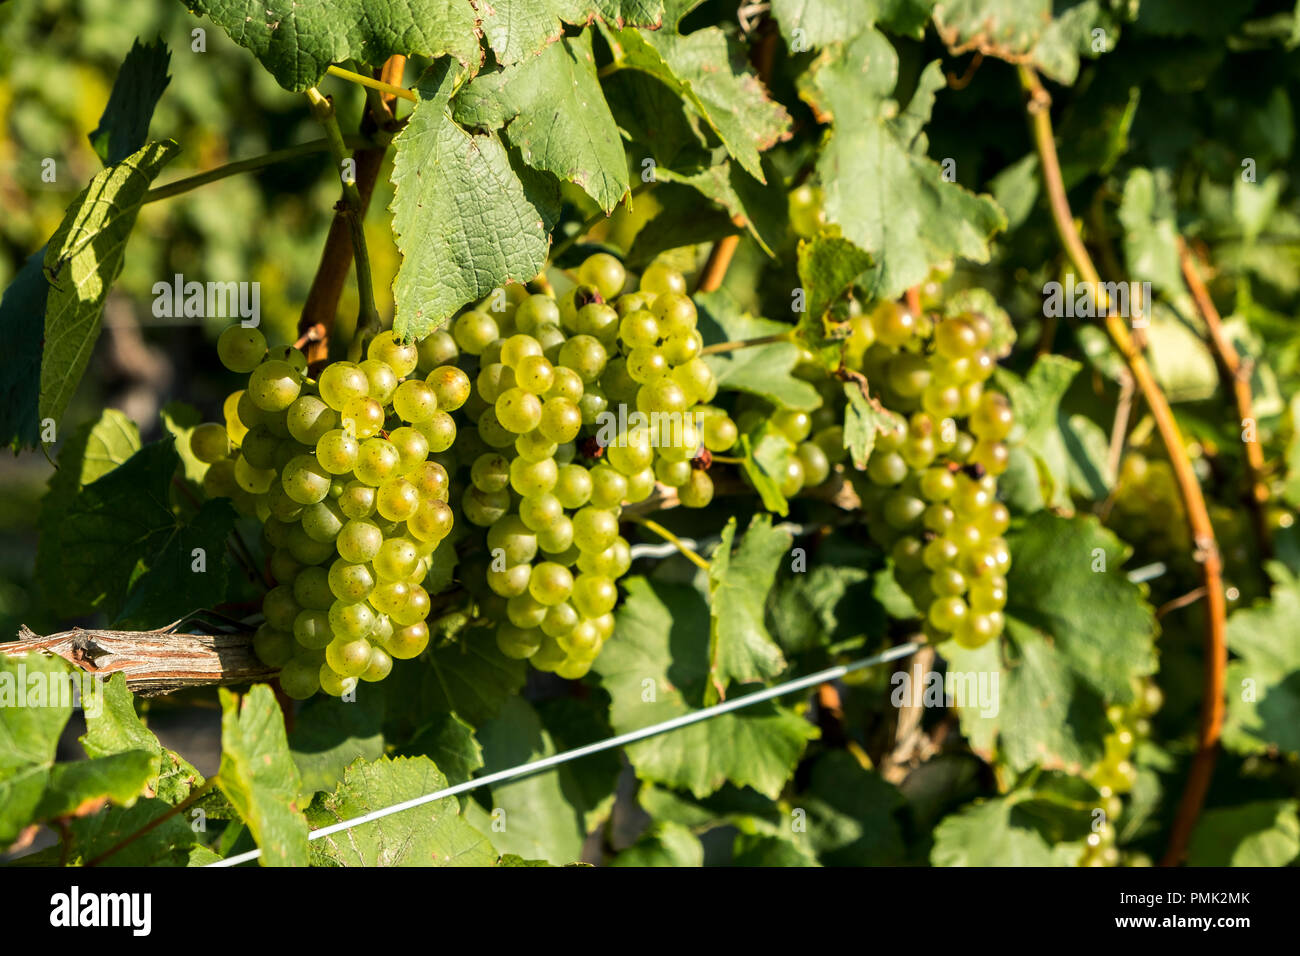 Green grapes hang on sunlit vines in Niagara on the Lake, Ontario, Canada, Stock Photo